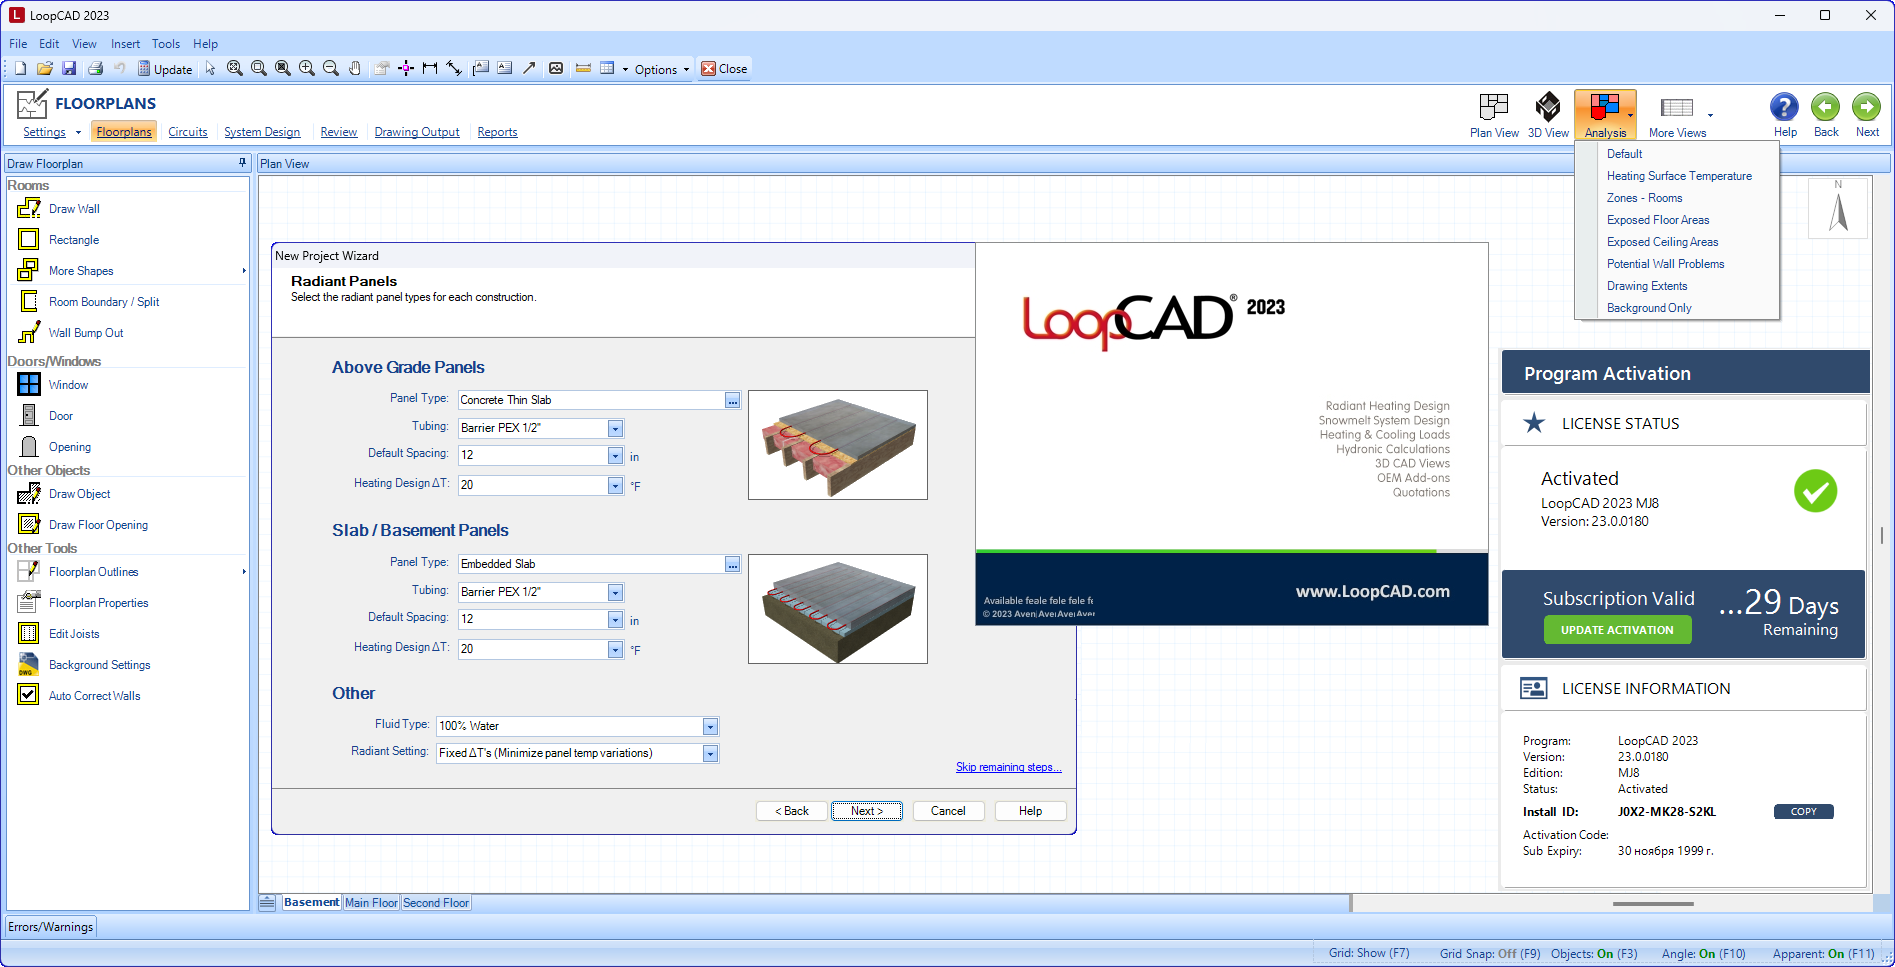 Working with LoopCAD 2023 MJ8 Edition v23.0.0180 full license